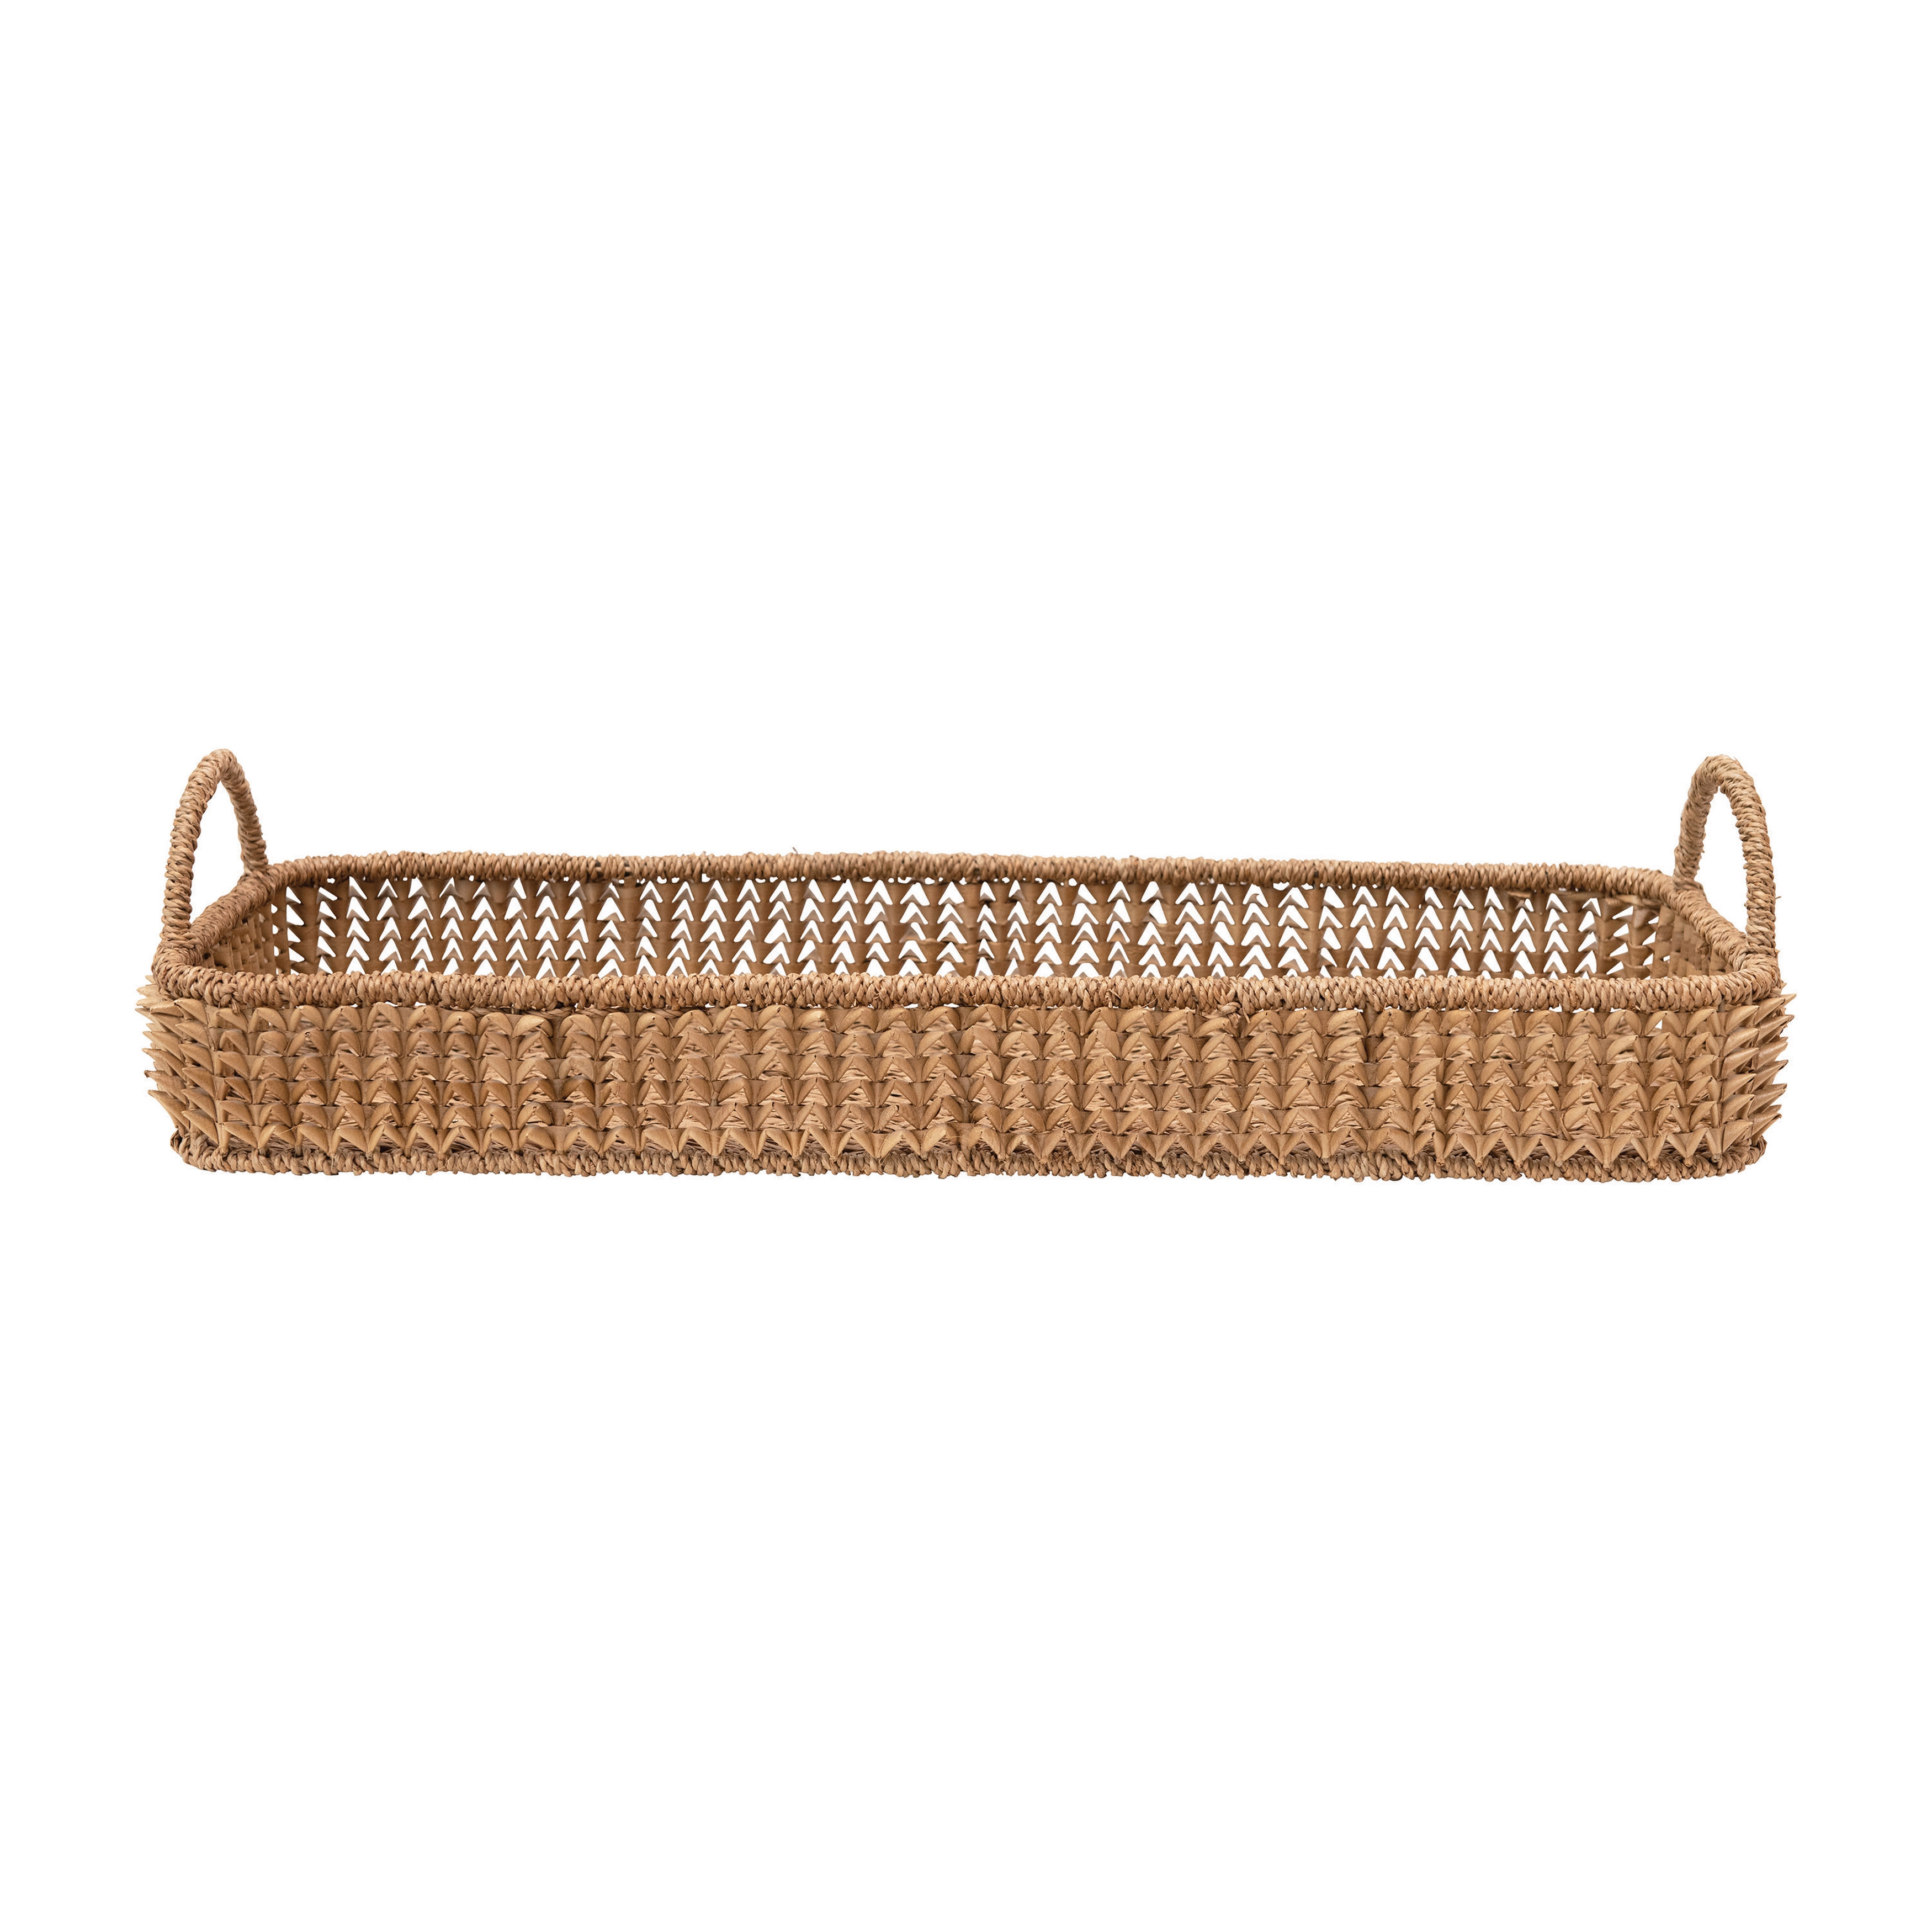 Decorative Hand-Woven Buri Palm Tray with Handles, Natural - Image 0